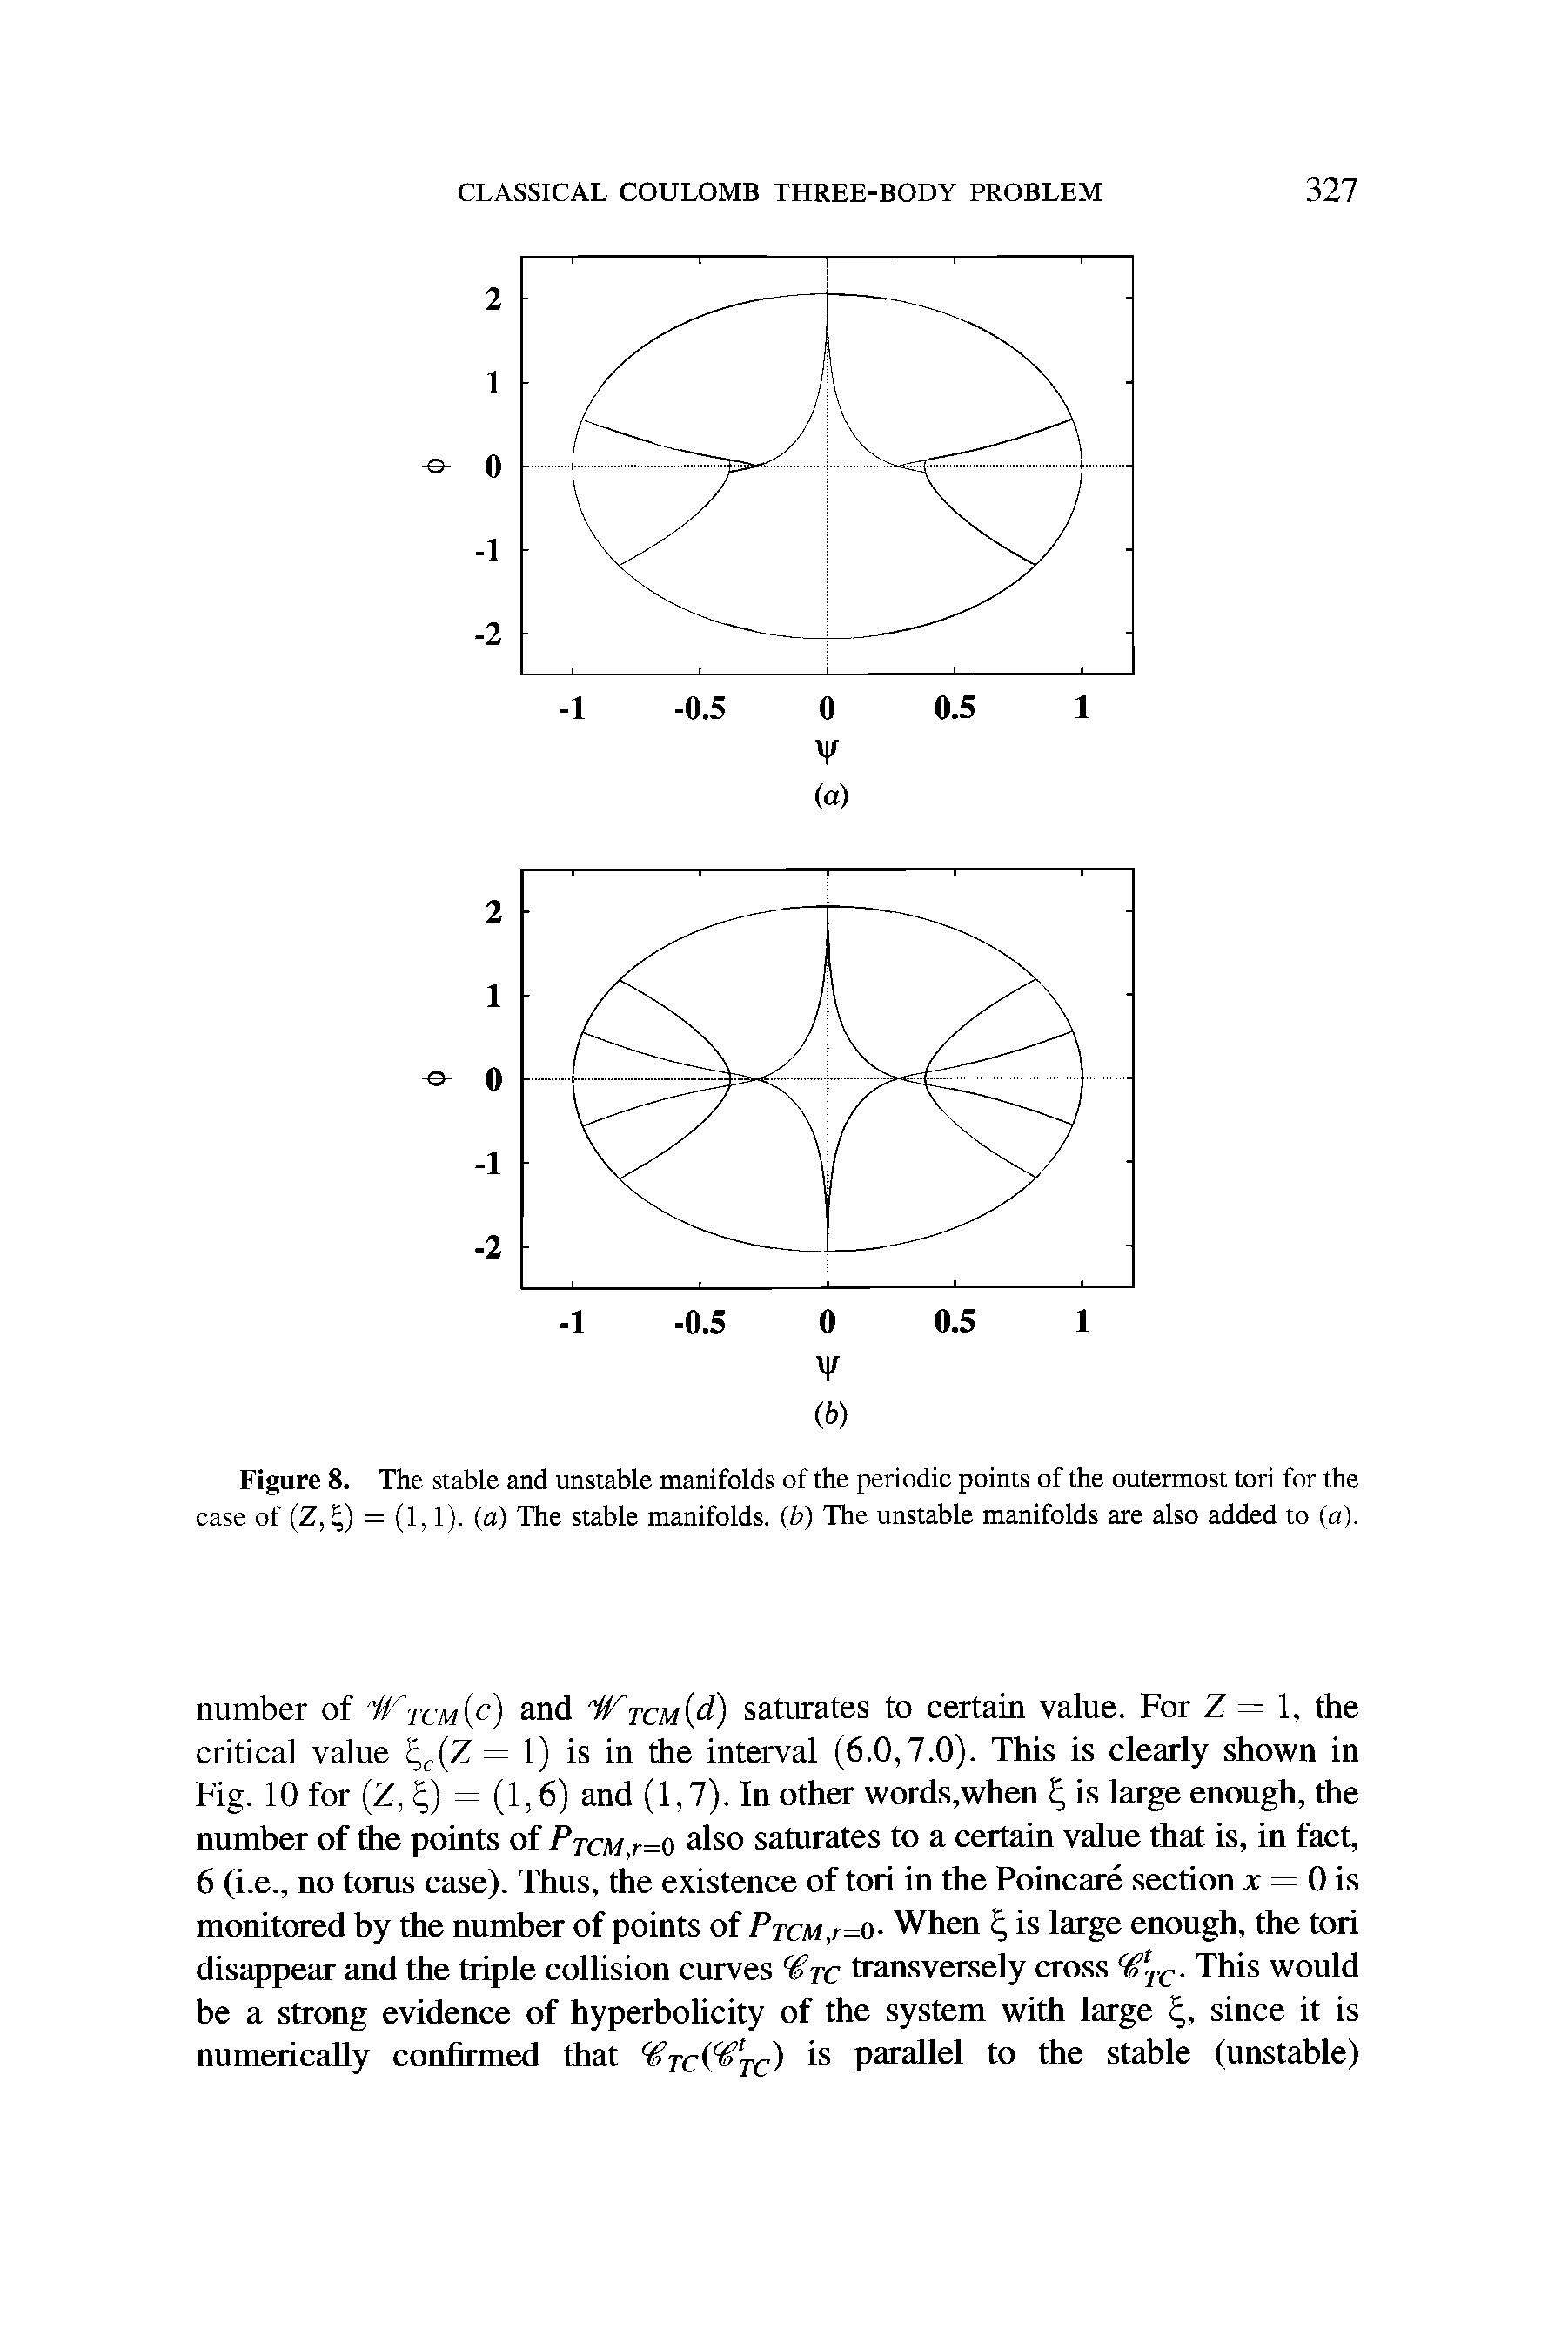 Figure 8. The stable and unstable manifolds of the periodic points of the outermost tori for the case of (Z, 5) = (1,1). (a) The stable manifolds, (b) The unstable manifolds are also added to (a).